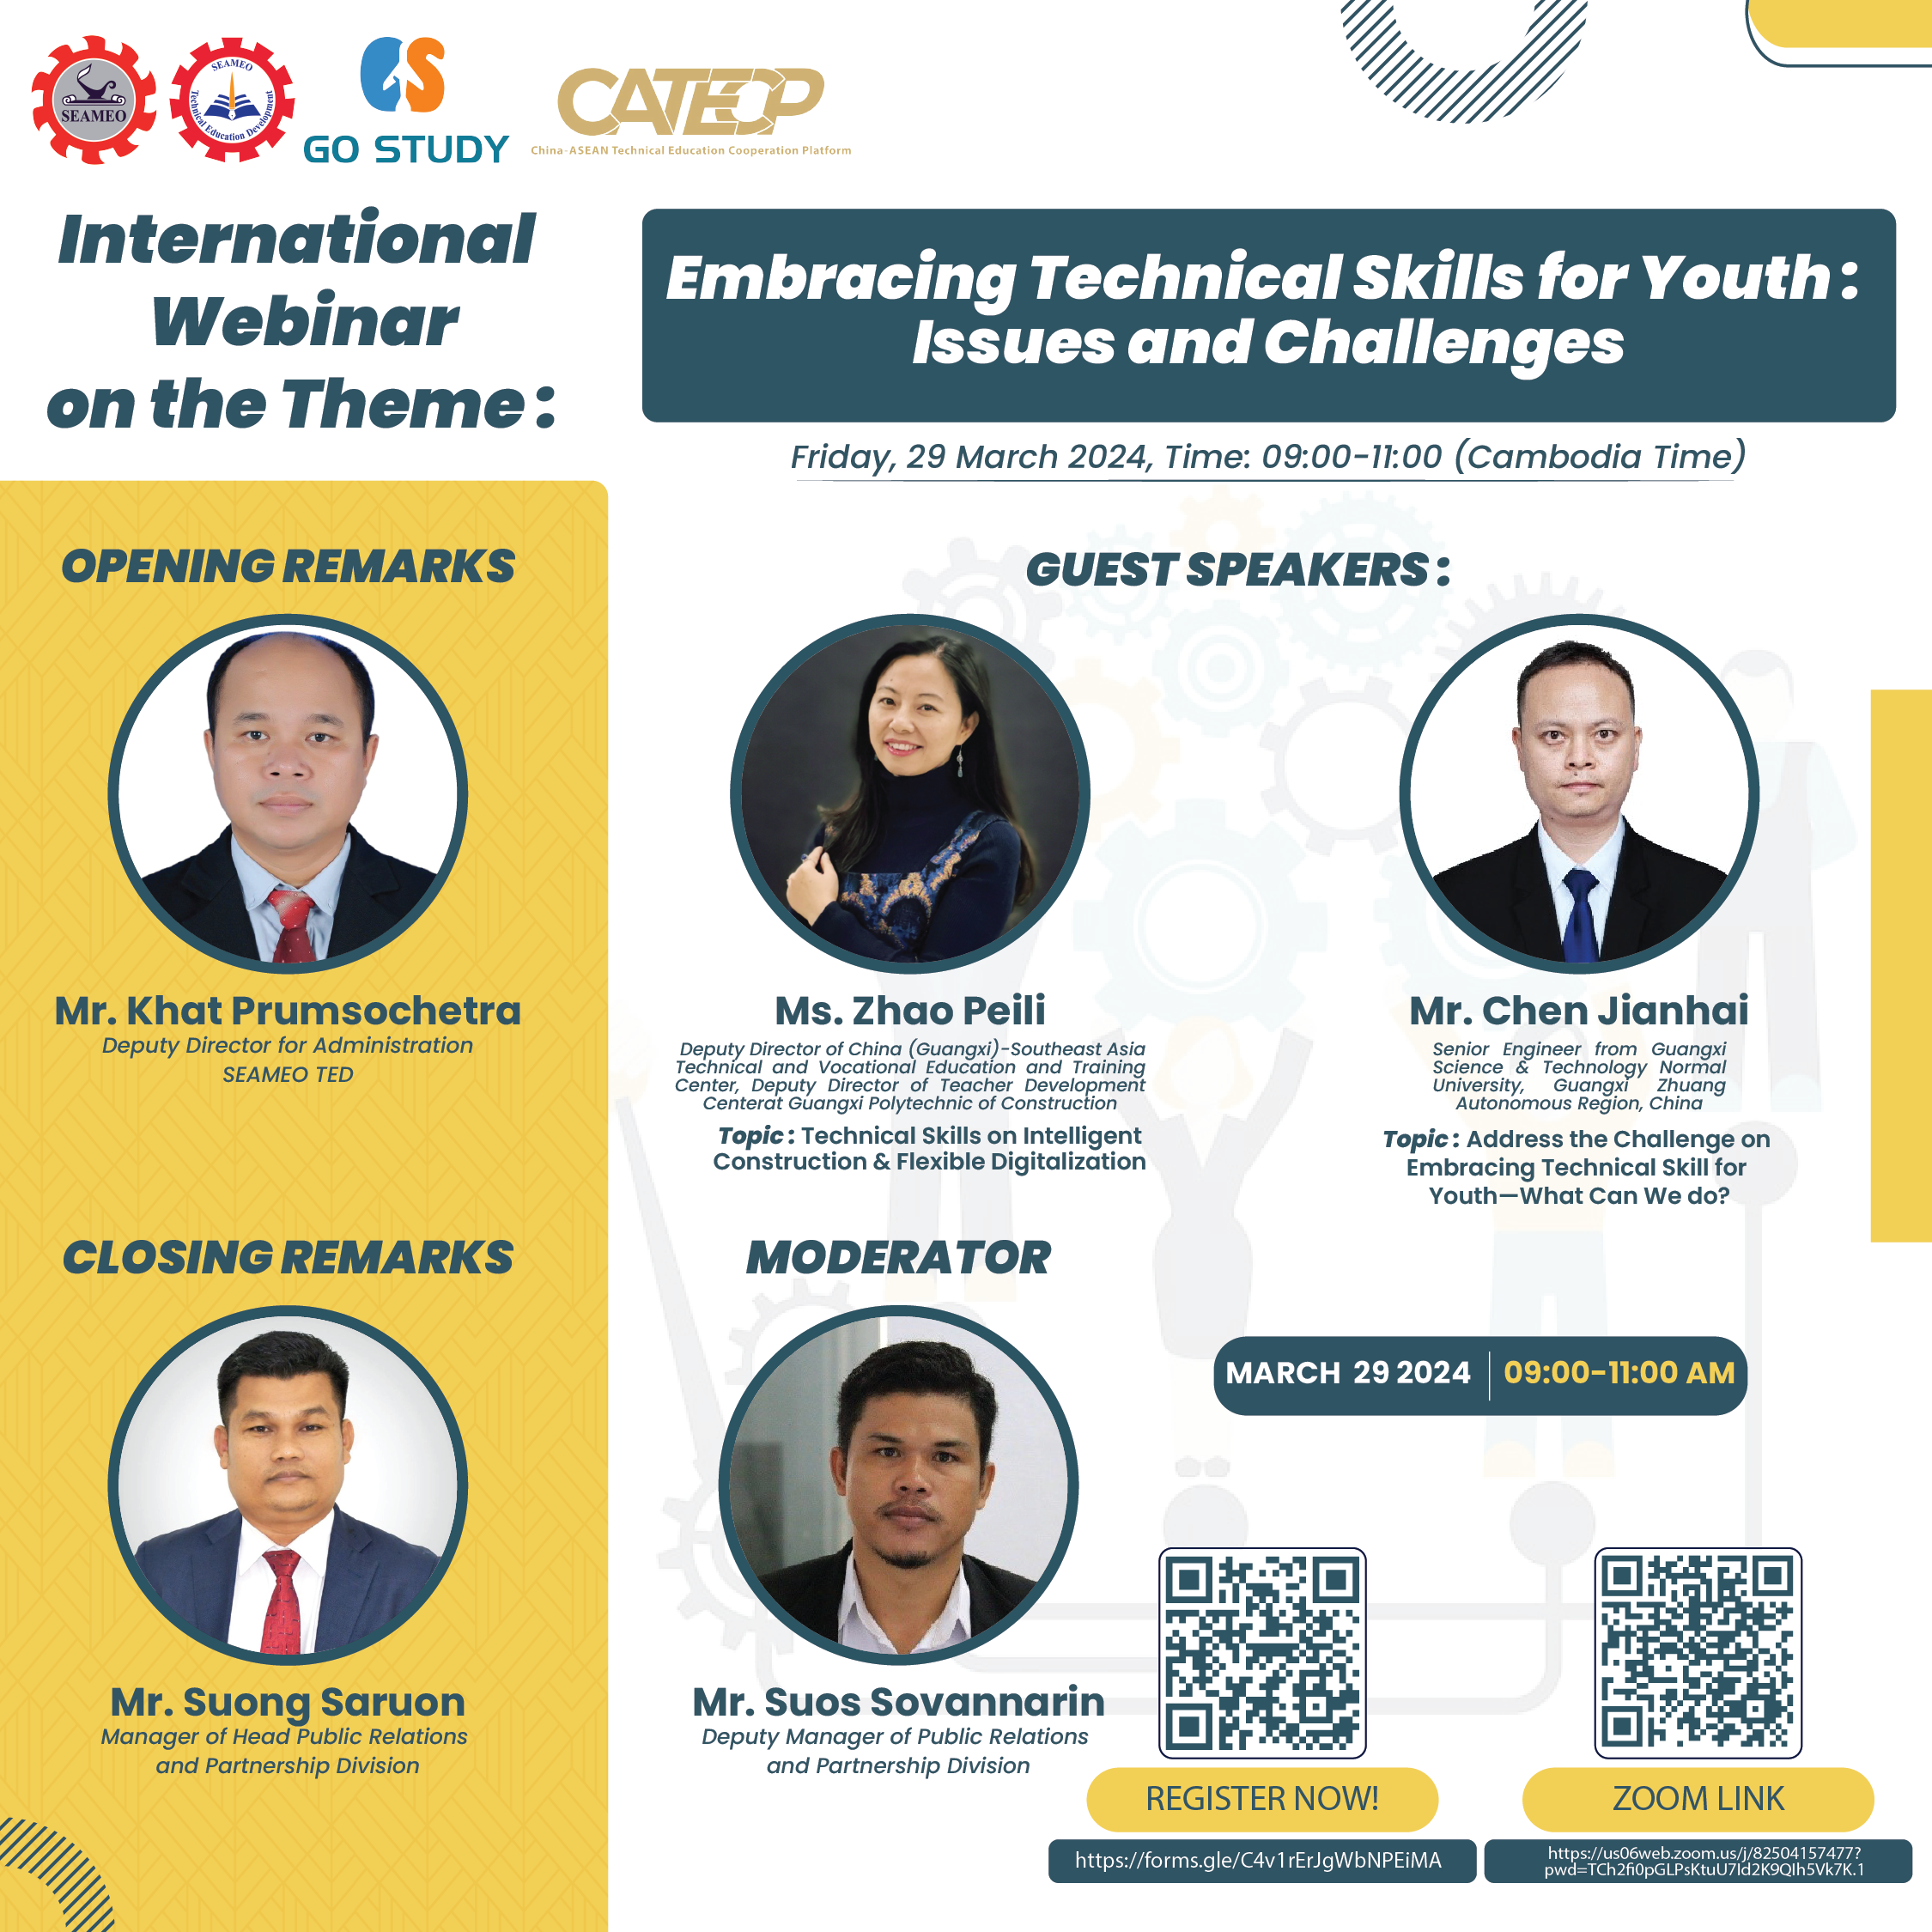 International Webinar On the theme: Embracing Technical Skills for Youth: Issues and Challenges